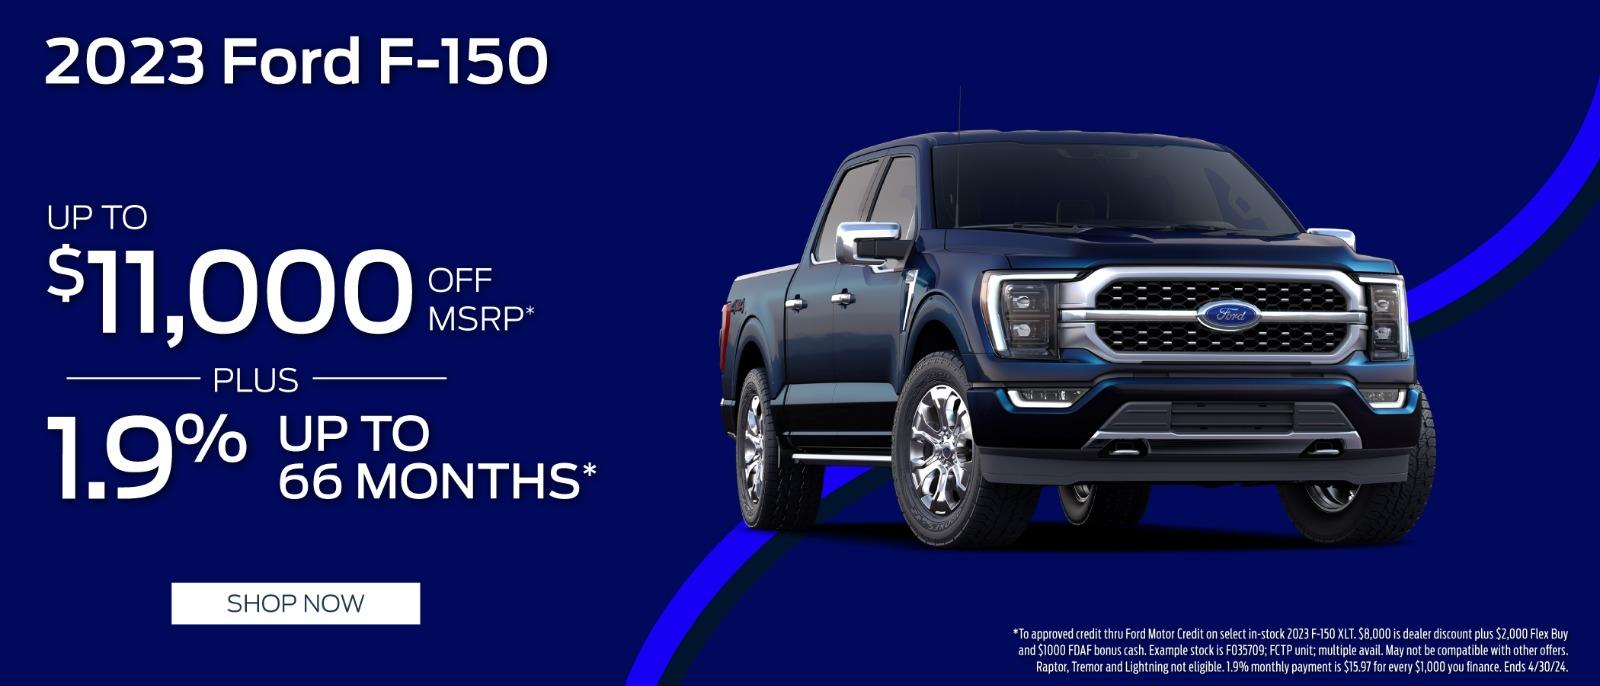 2023 Ford F-150  up to $11,000 off MSRP Plus1.9% up to 66 months